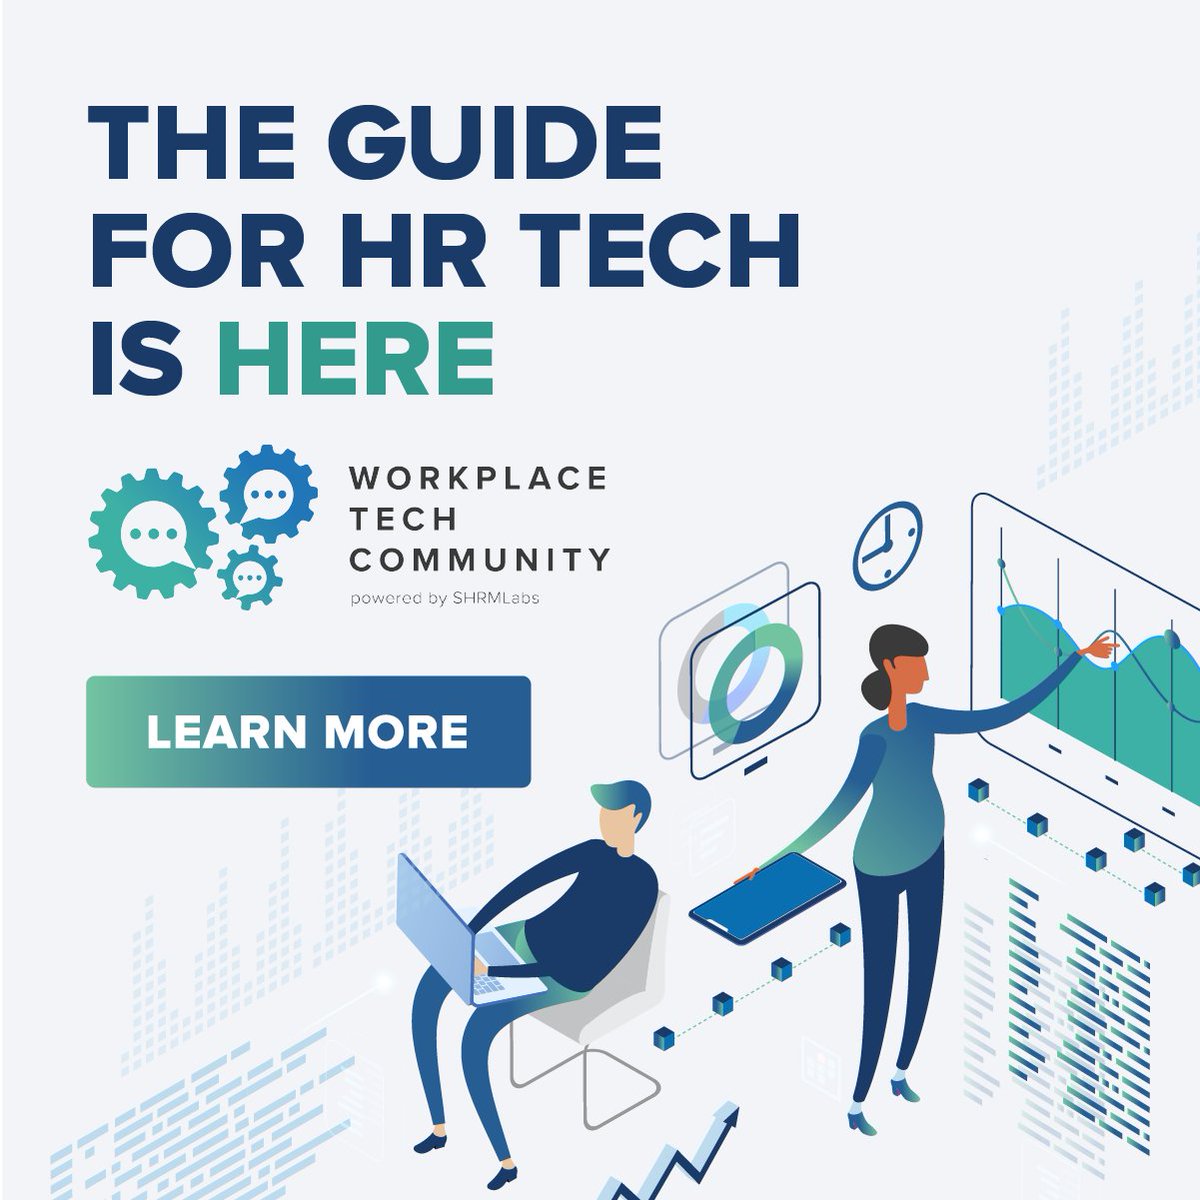 Come and be a part of the Workplace Tech Community! WTC is a vibrant community dedicated to #HRPros who want to explore innovative solutions, overcome technology obstacles, and build valuable connections. Your input matters! shrm.co/54txml